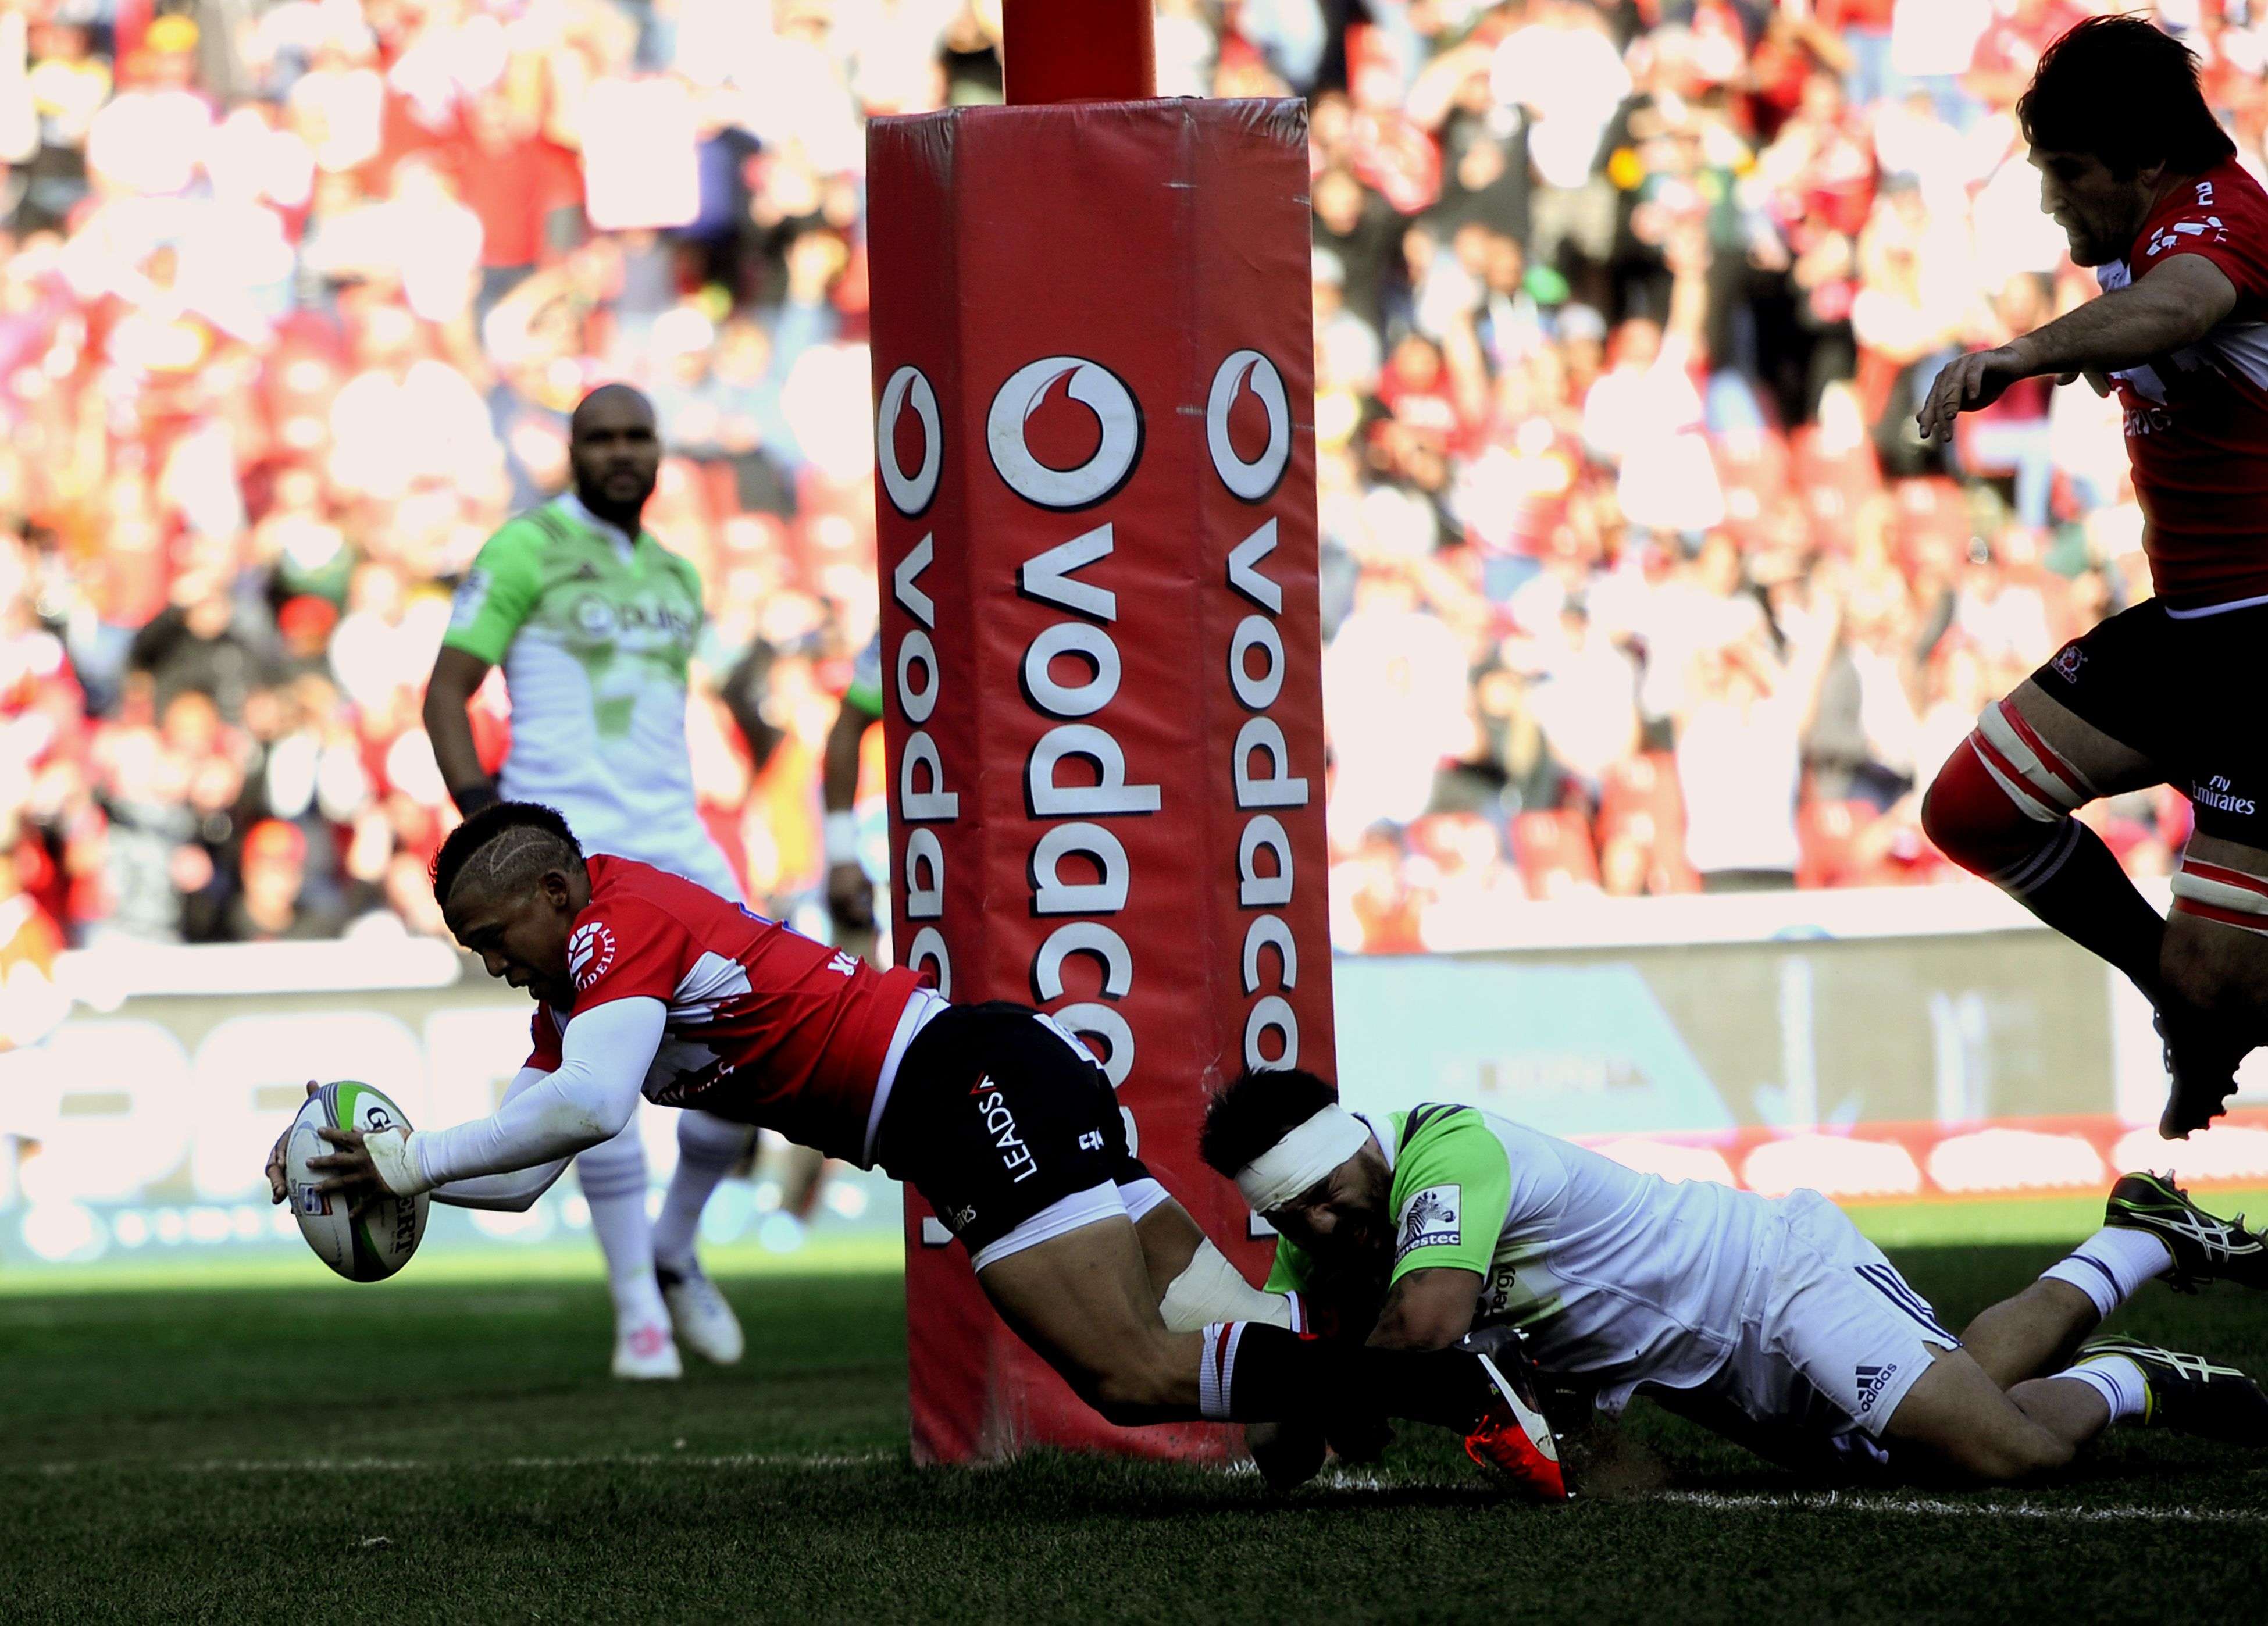 Golden Lions fly-half Elton Jantjies scores a try while being tackled by Ash Dixon of the Highlanders during their Super Rugby semi-final at Ellis Park in Johannesburg on Saturday. Photo: AFP